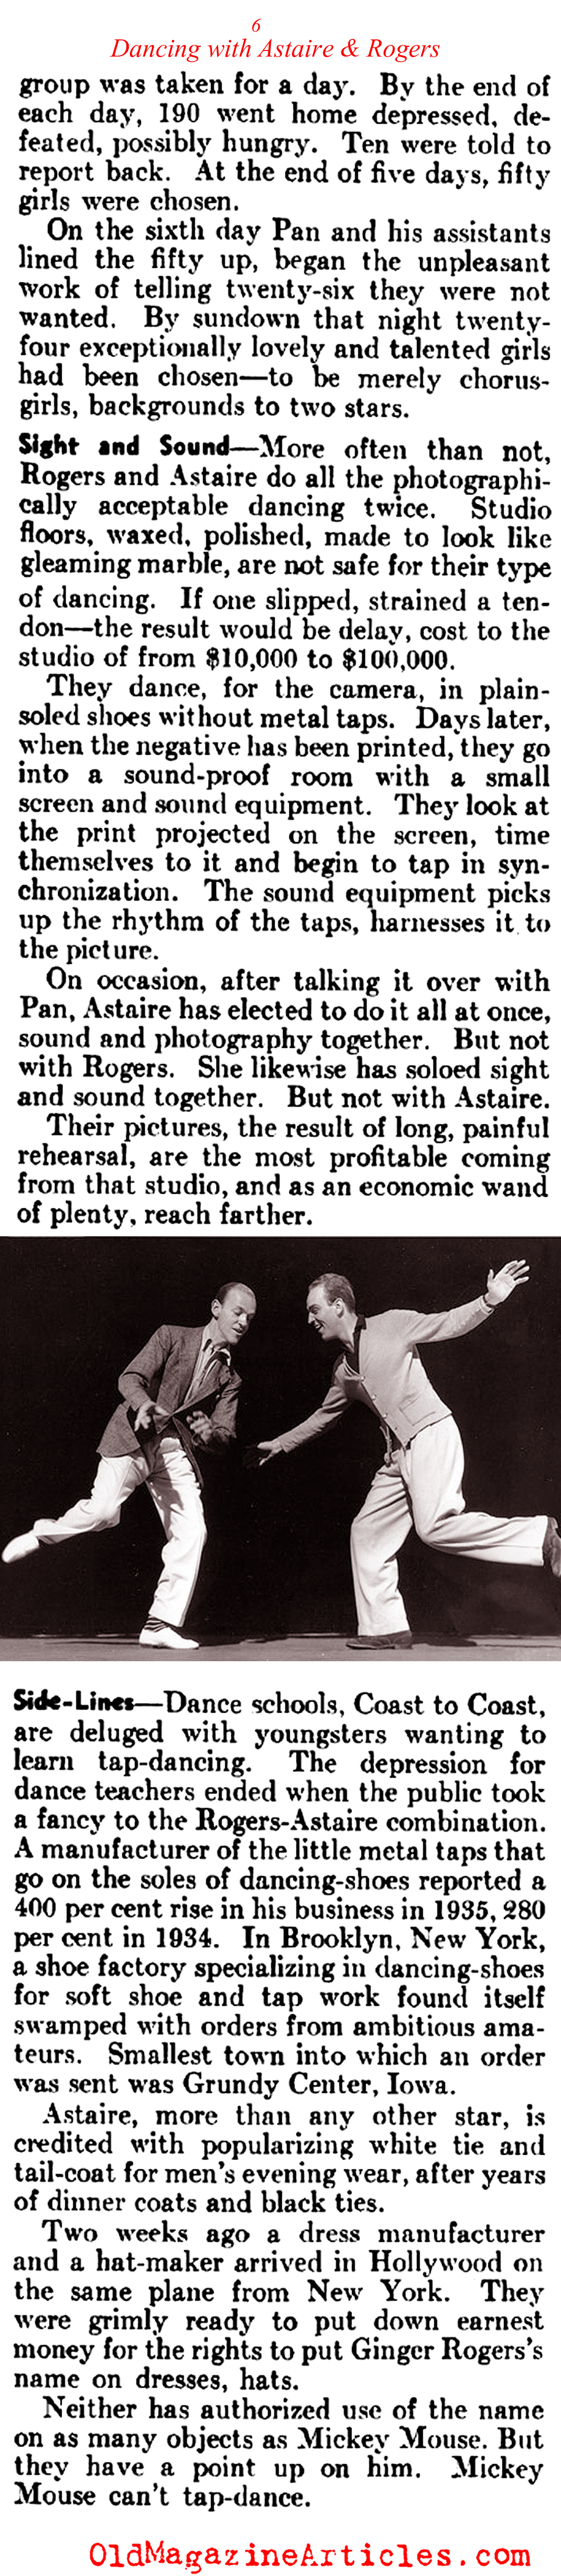 This Guy Coached Astaire and Rogers (Literary Digest, 1936)